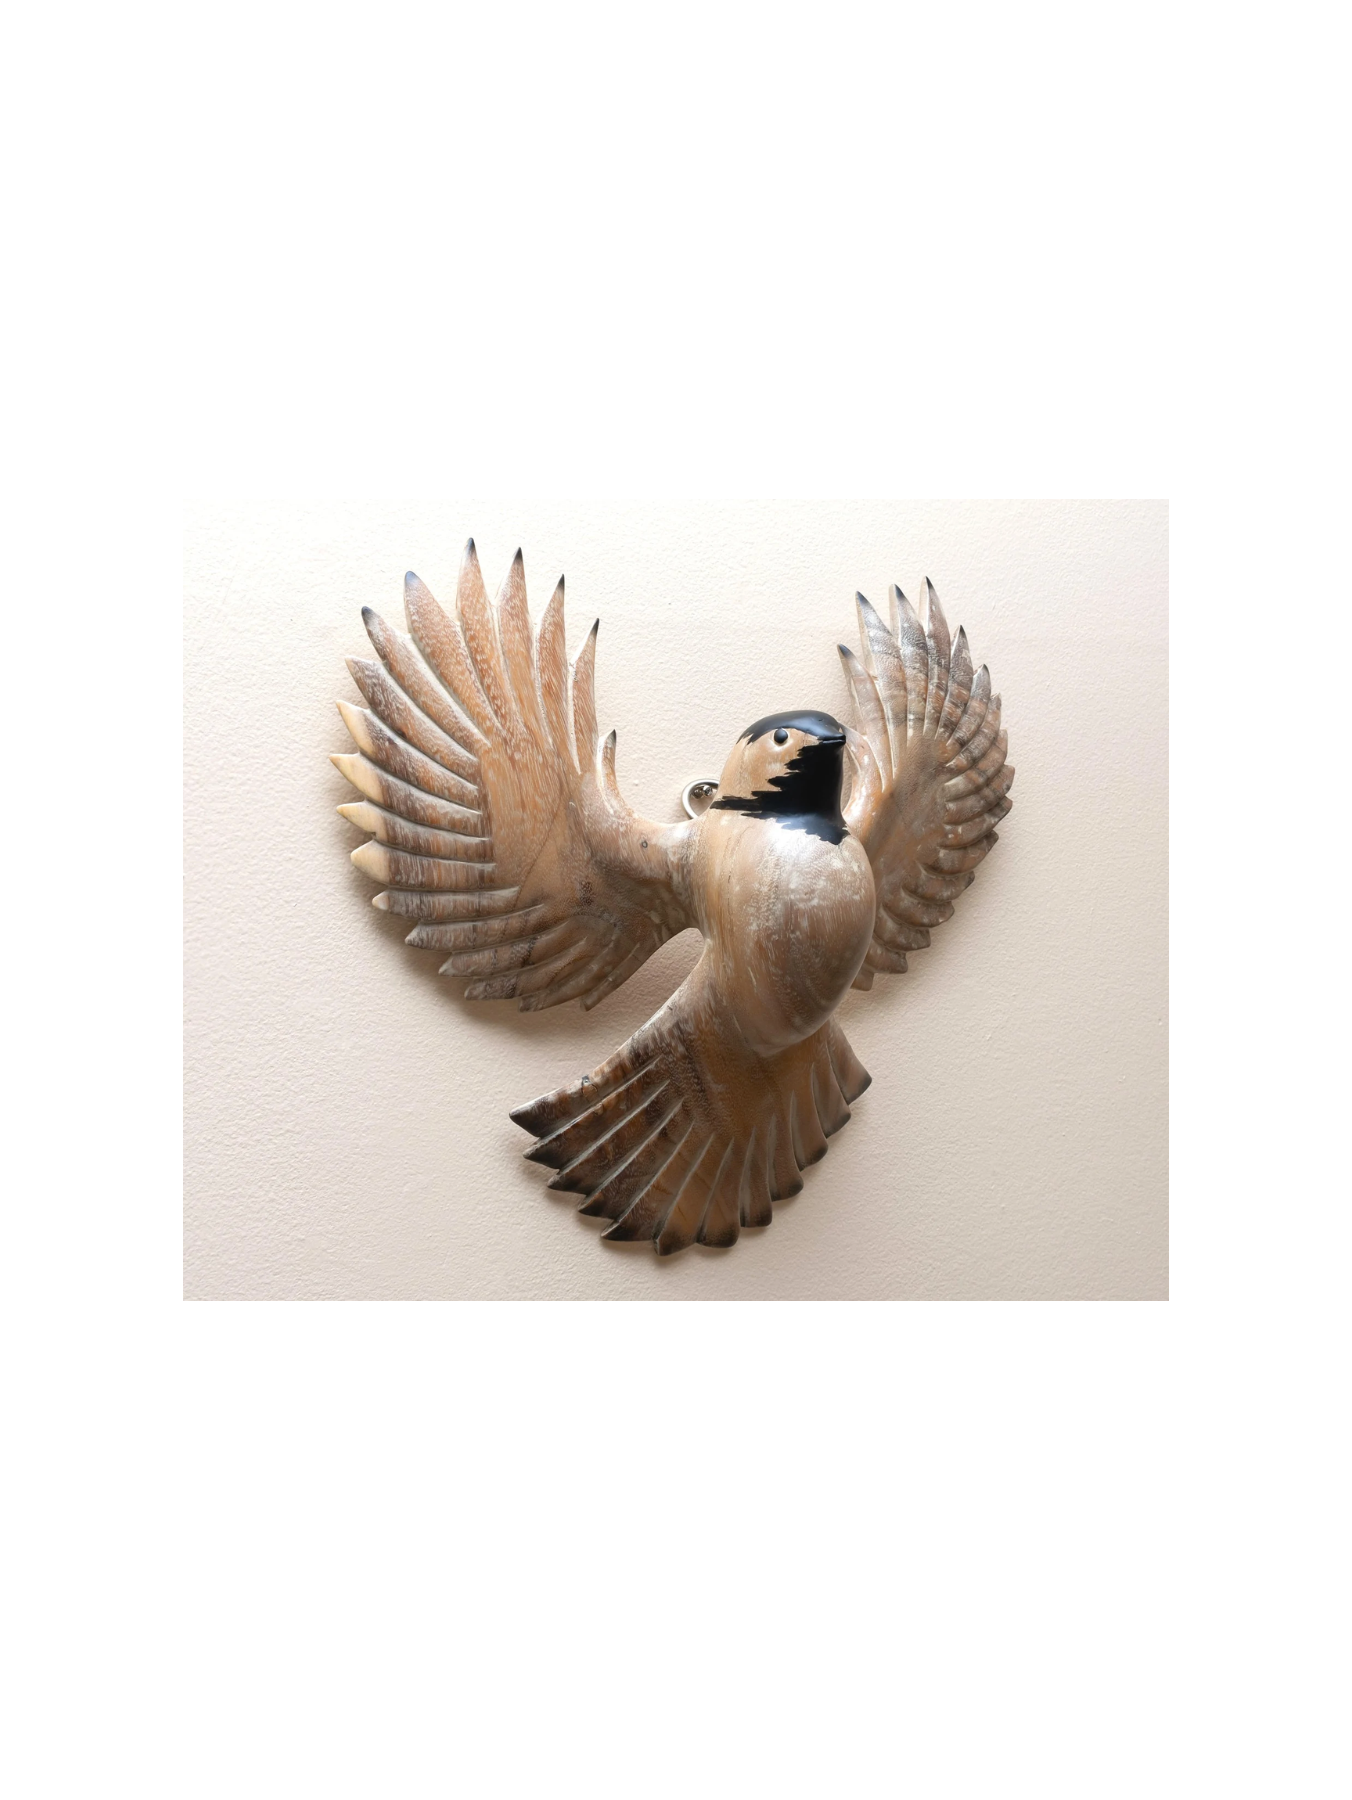 Wooden Hand Carved Starling Bird Wall Sculpture Art Decorative Statue Figurine Home Decor Accent Gift Handcrafted Hanging Decoration Handmade